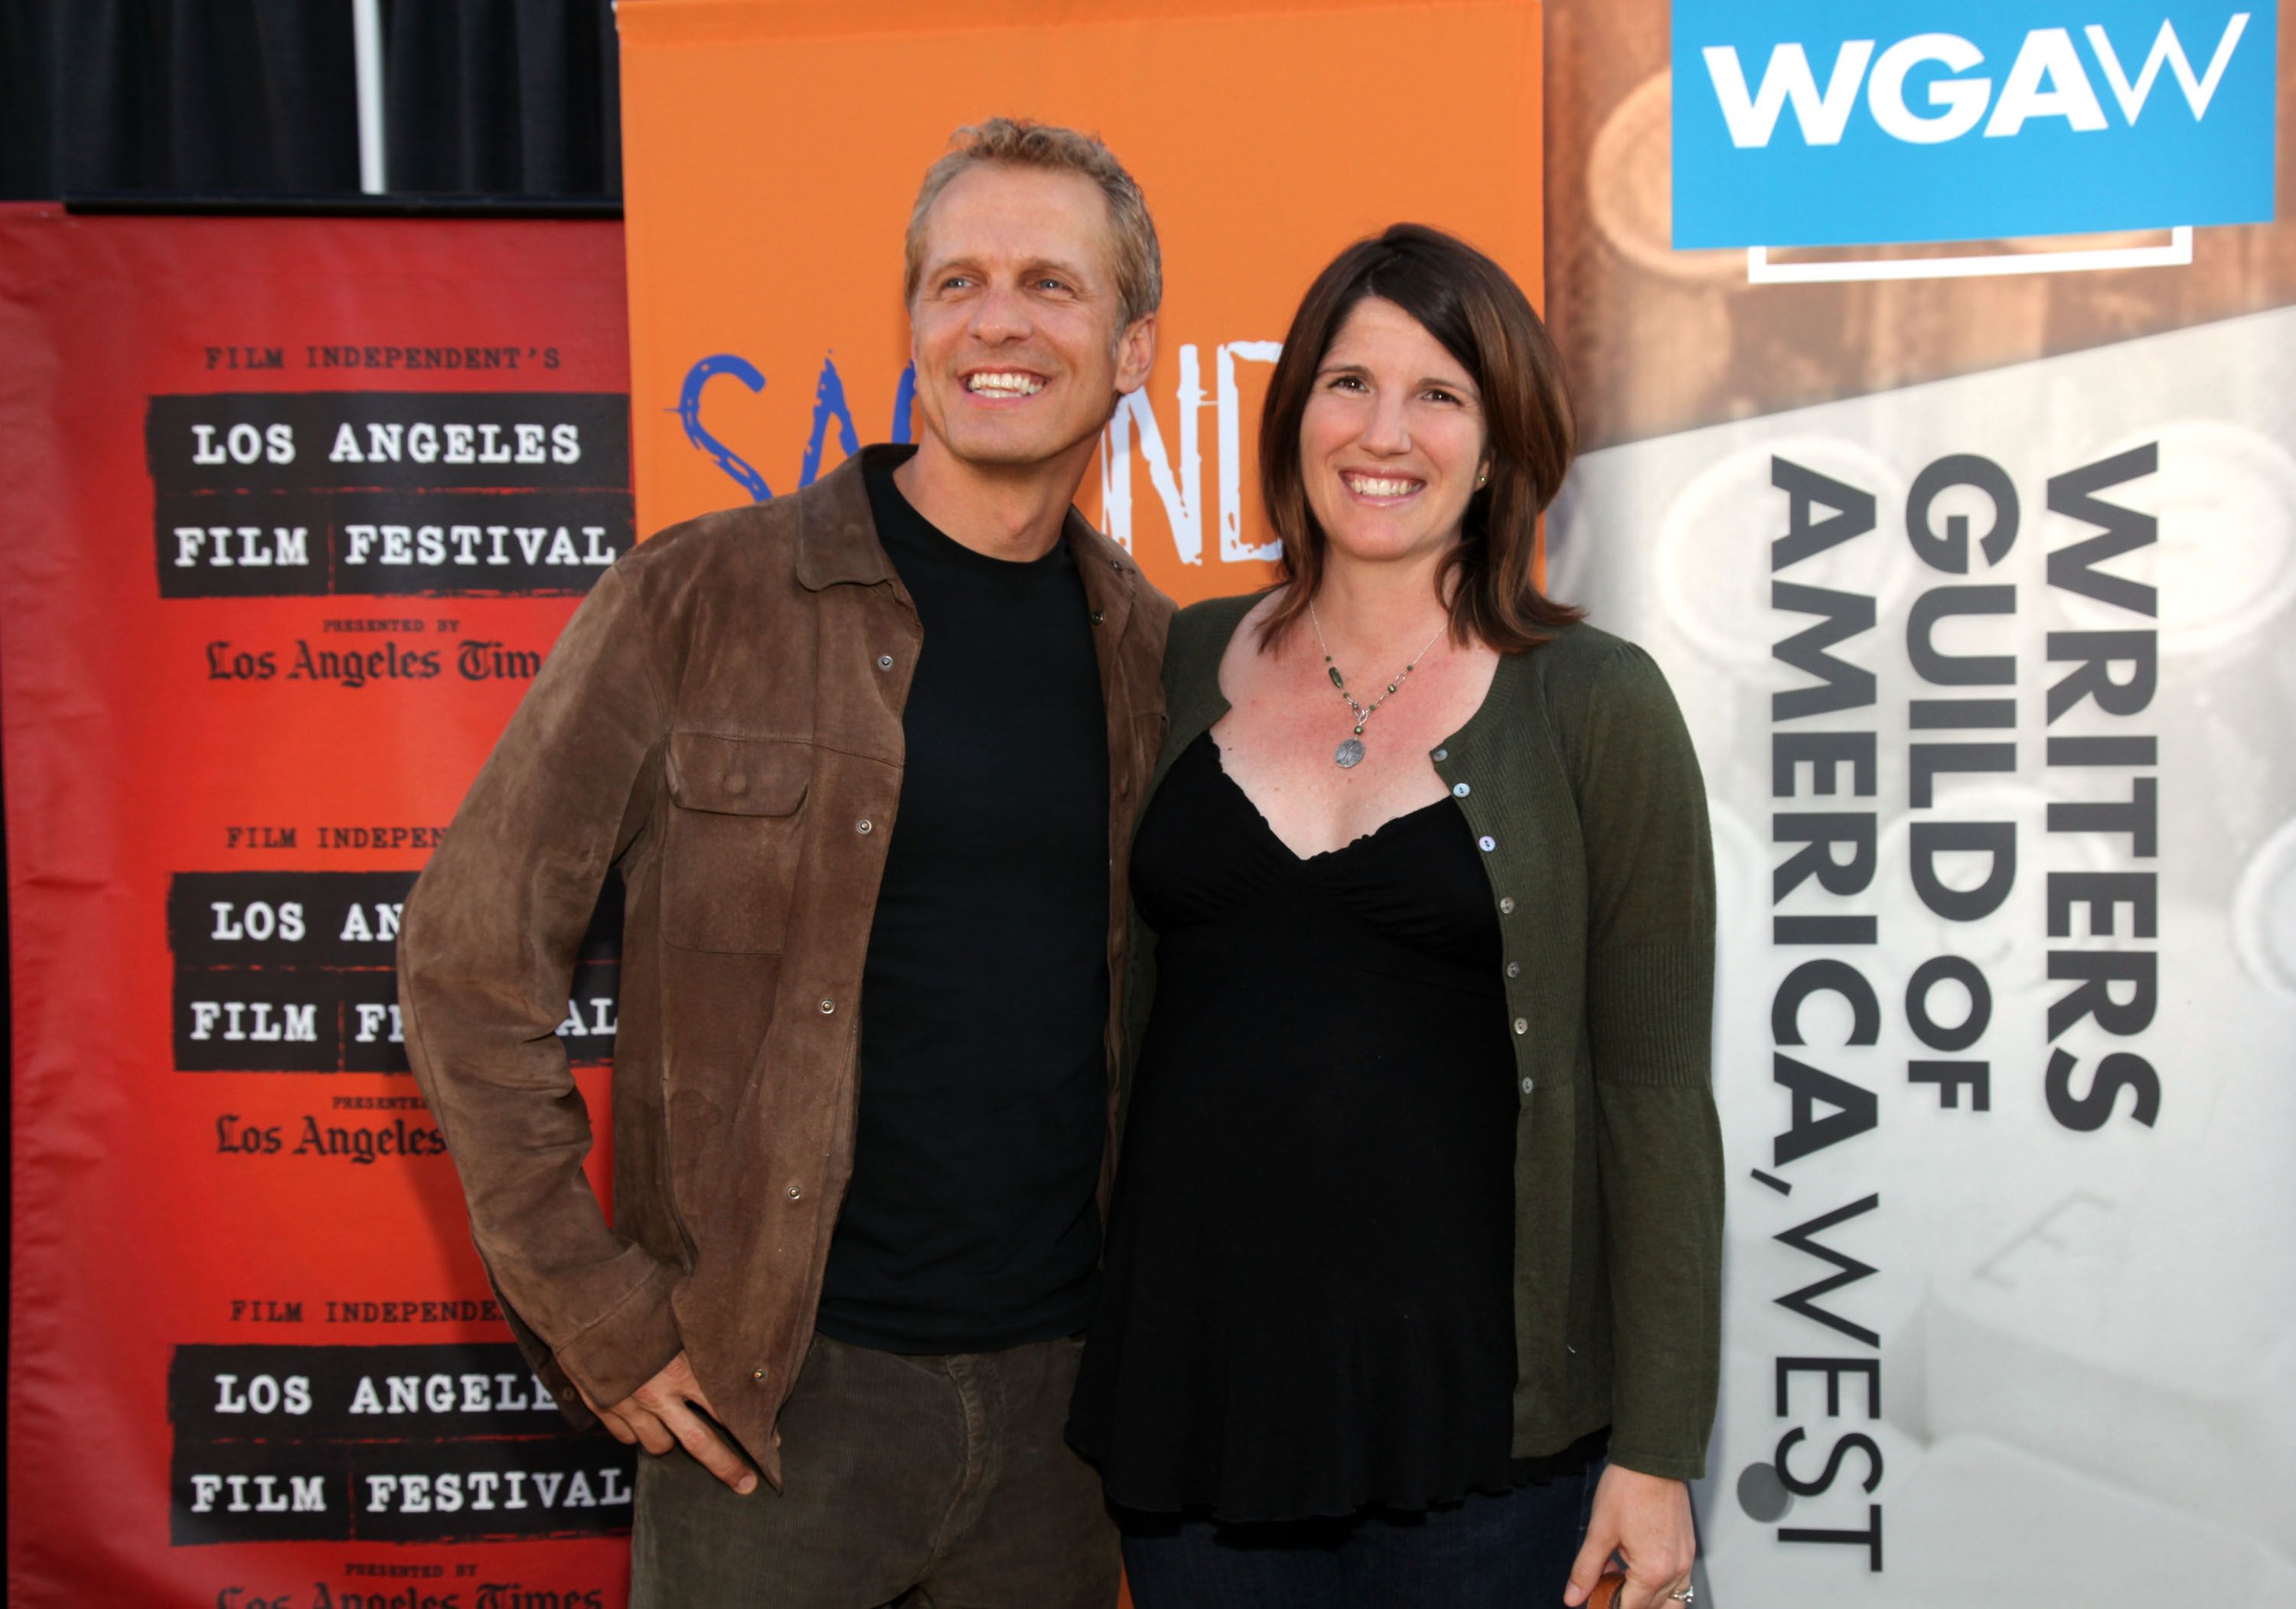 Patrick Fabian and Mandy Steckelberg during the SAG Indie/WGA Party during the 2010 Los Angeles Film Festival at J Lounge on June 23, 2010 in Los Angeles, California. | Source: Getty Images